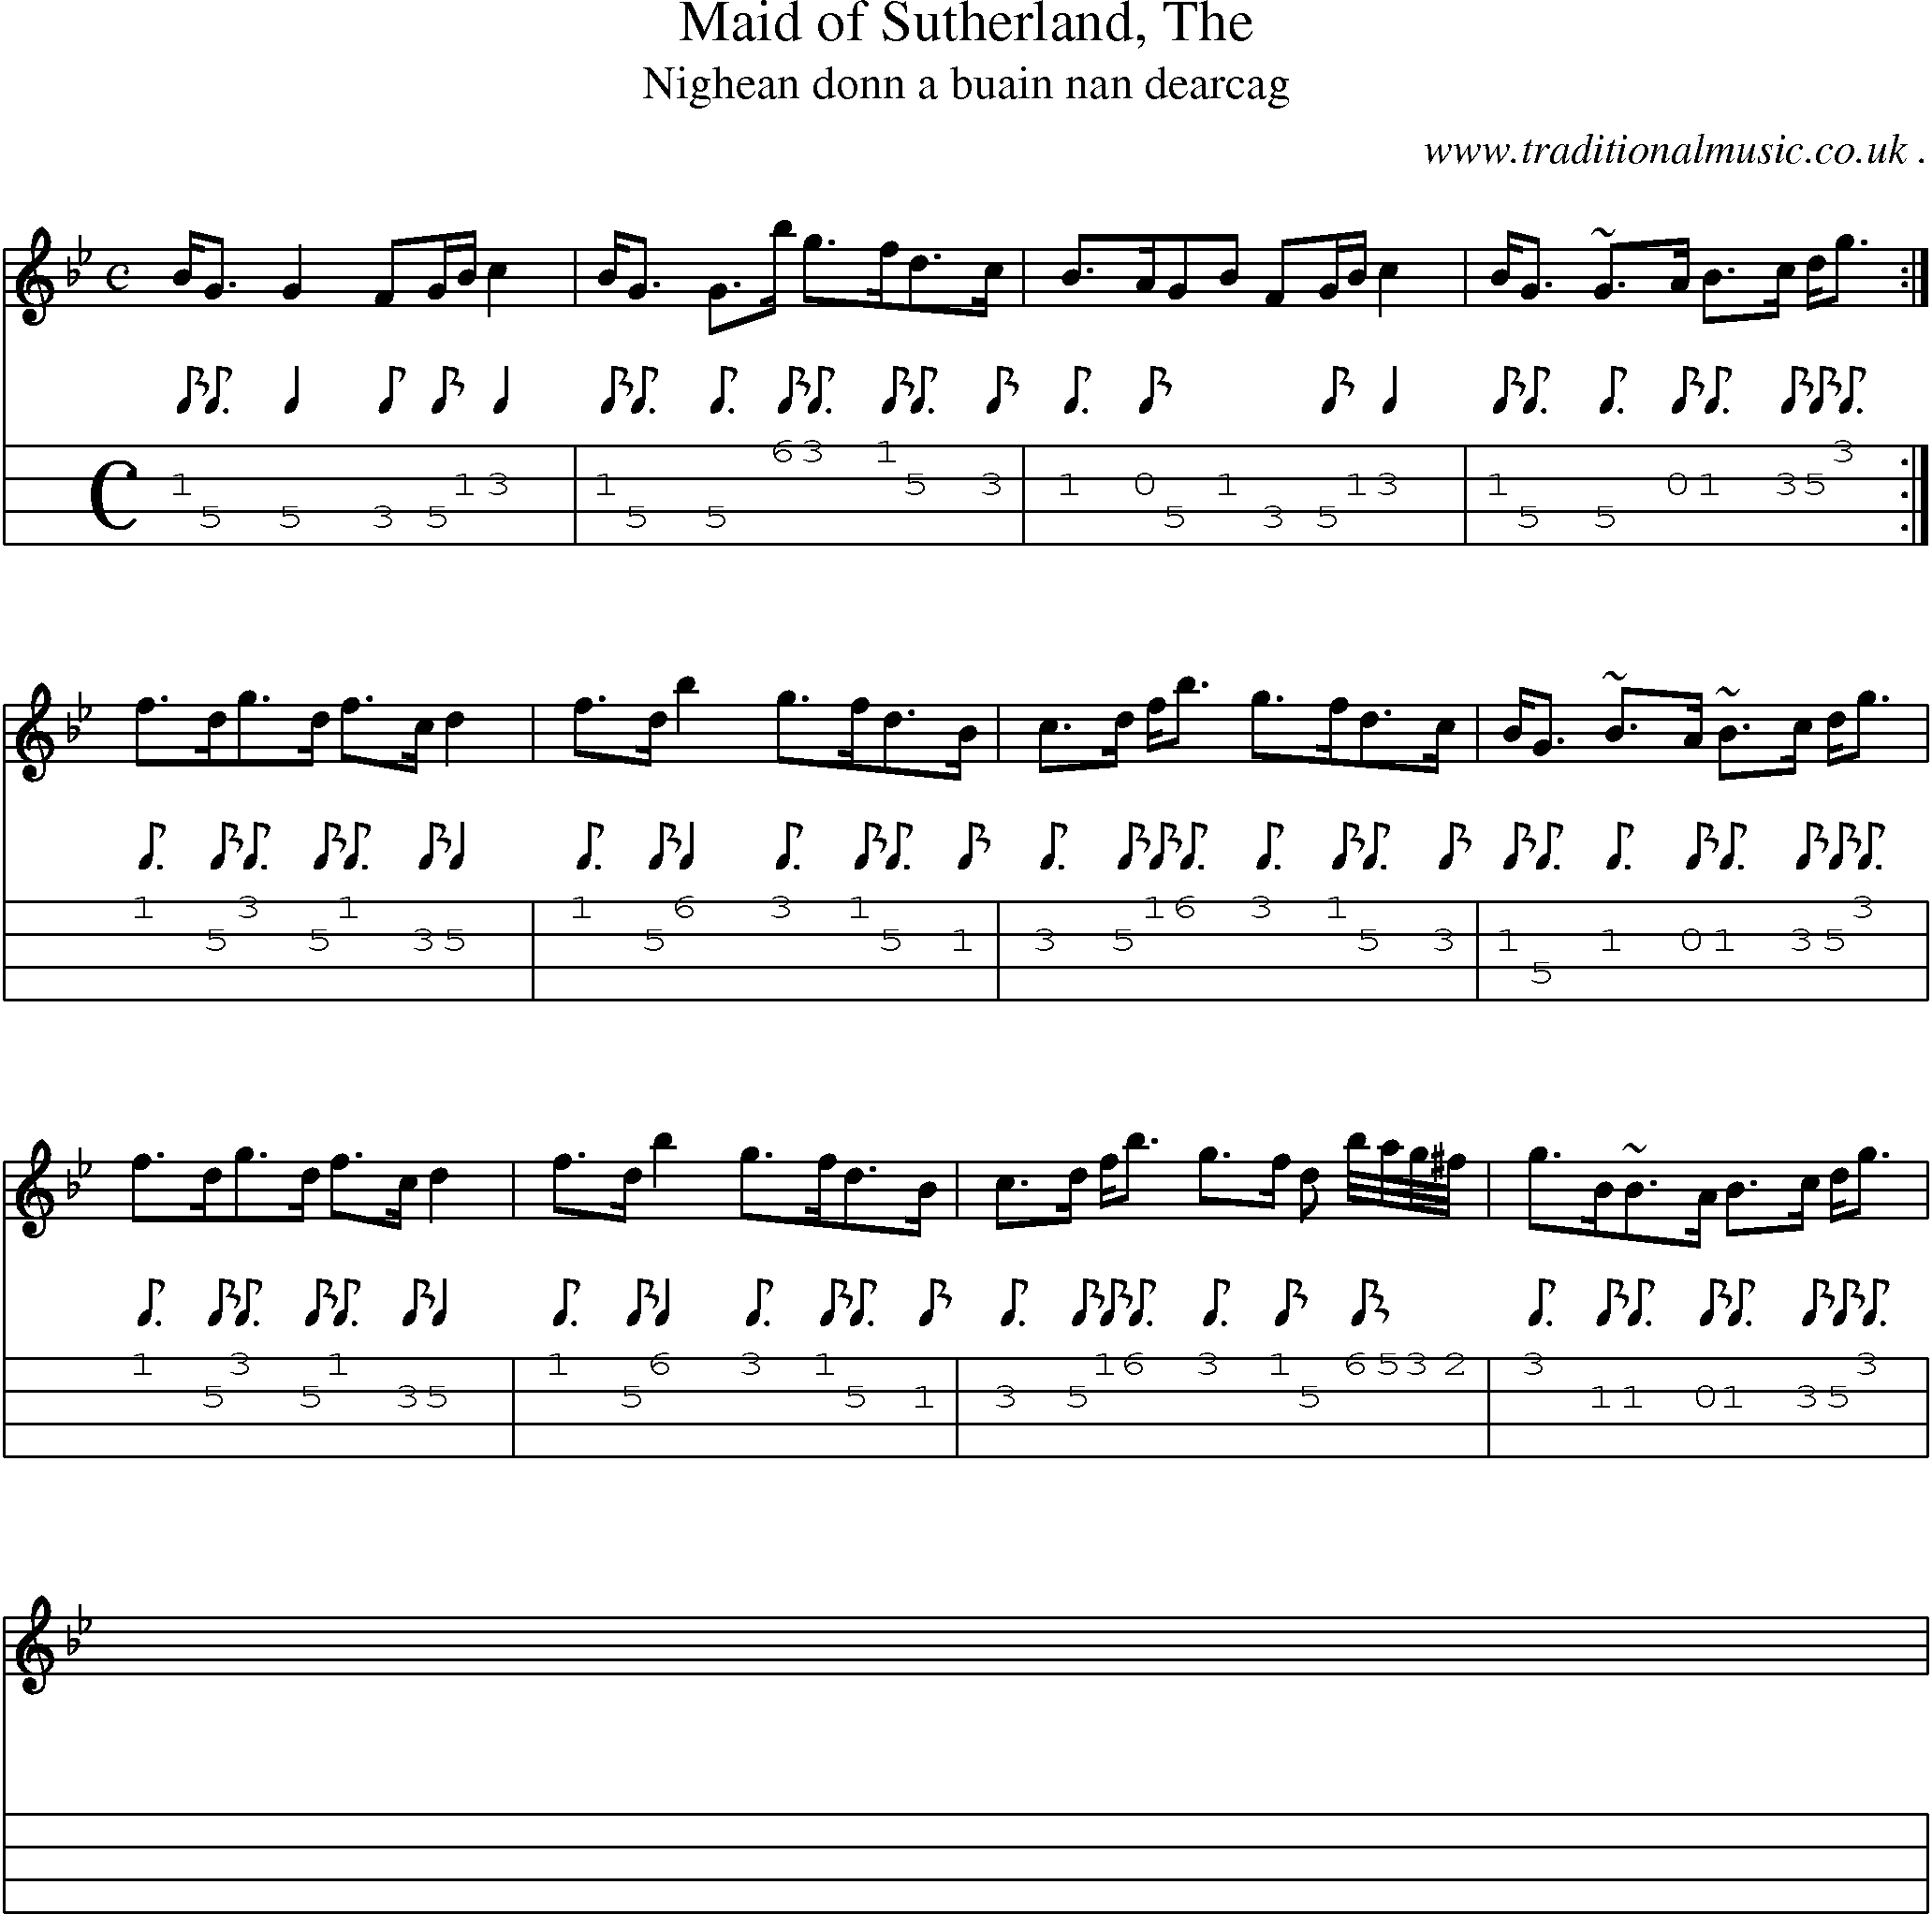 Sheet-music  score, Chords and Mandolin Tabs for Maid Of Sutherland The